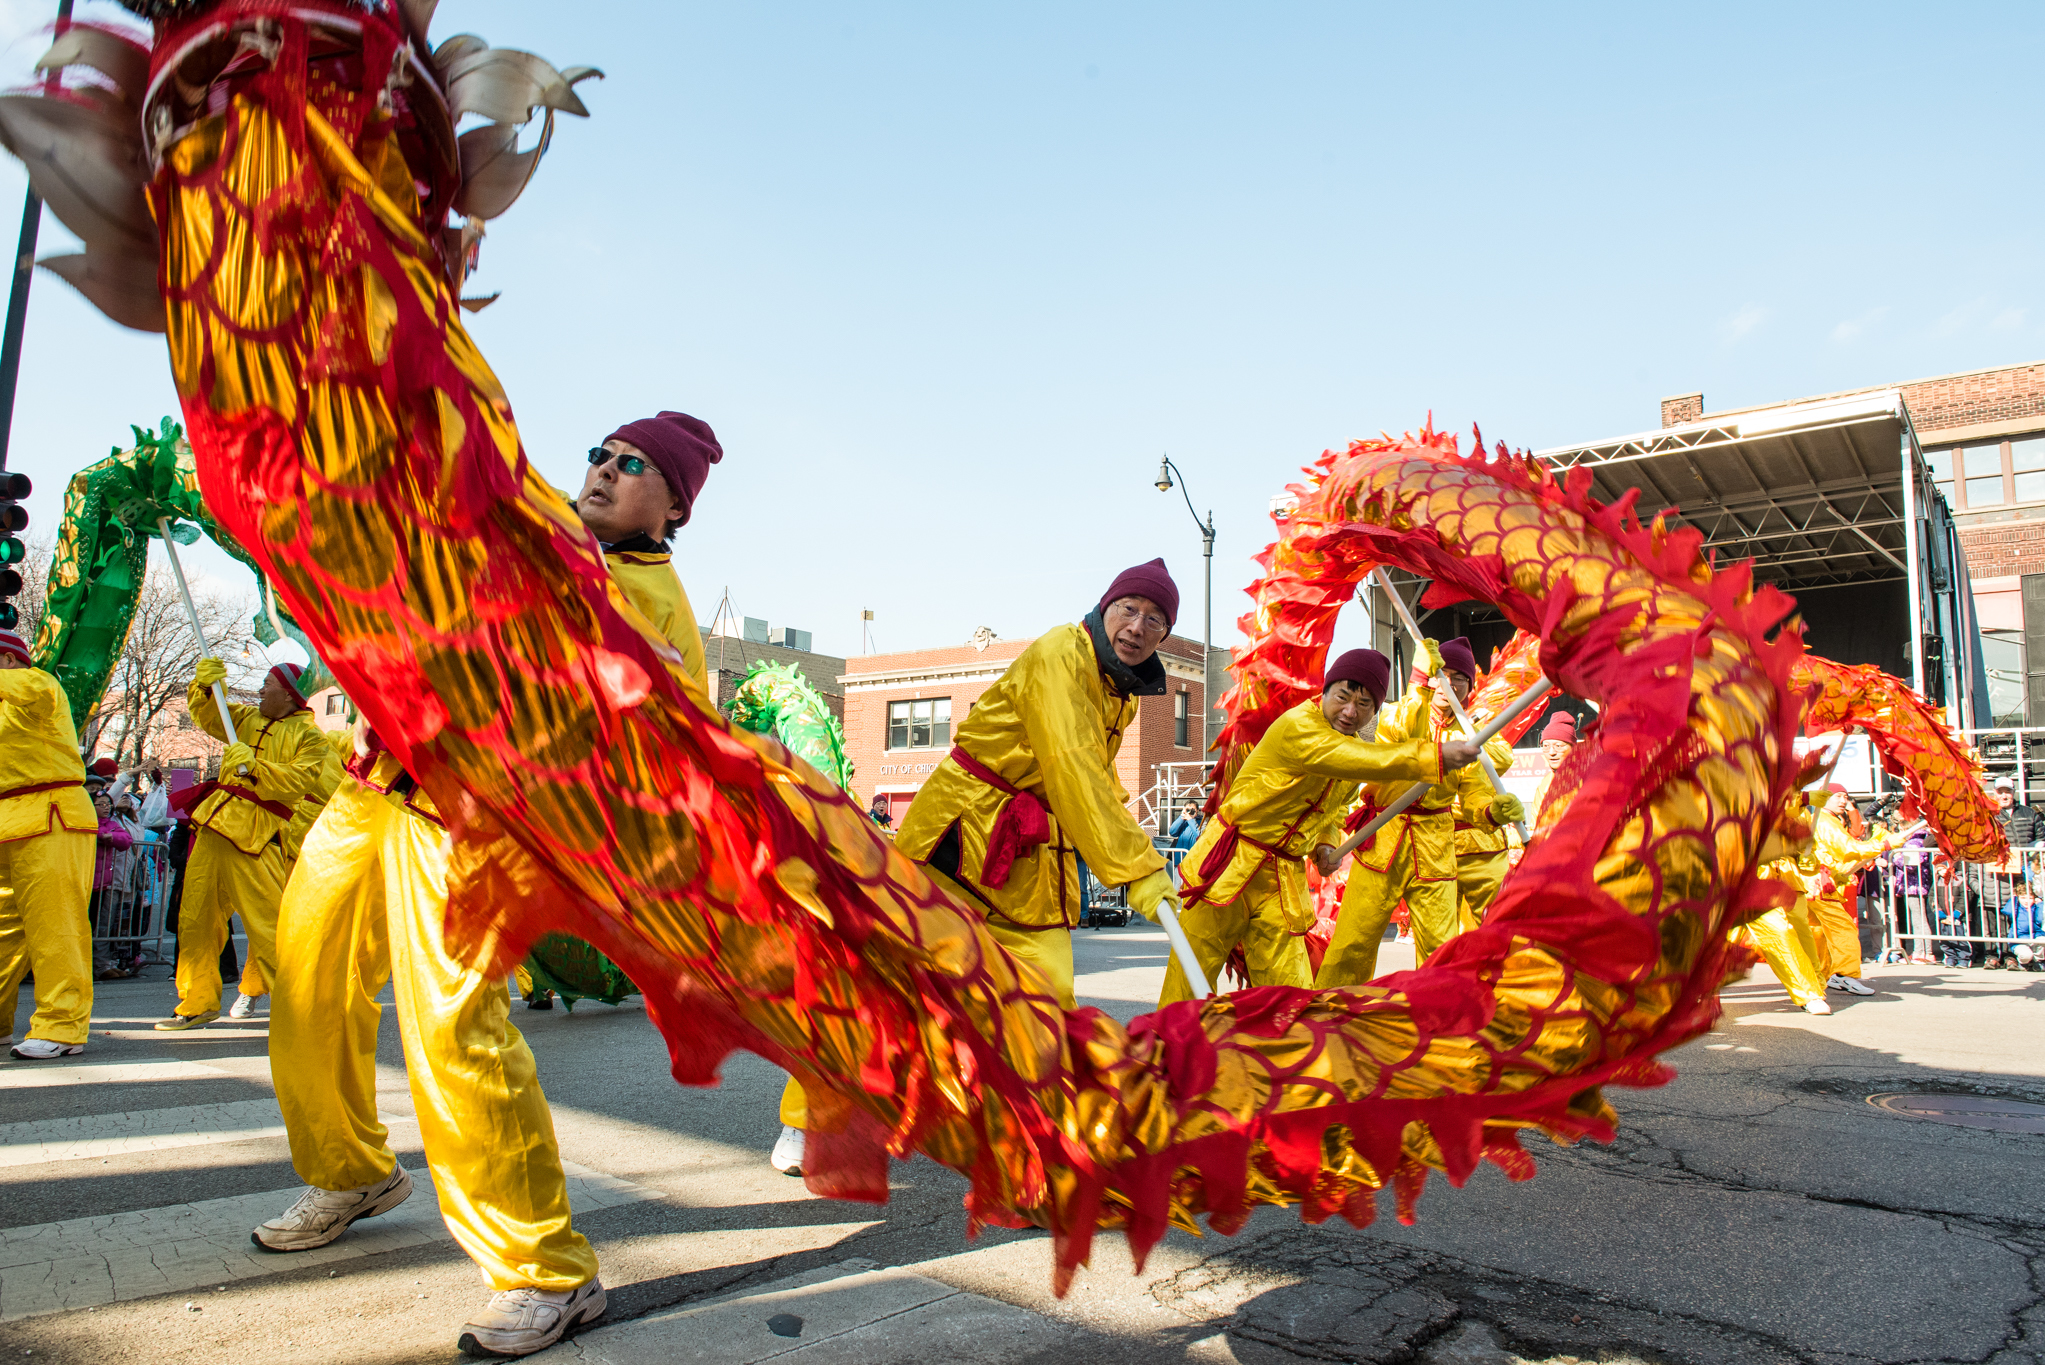 Chinese New Year celebrations aren't over yet - Medill Reports Chicago